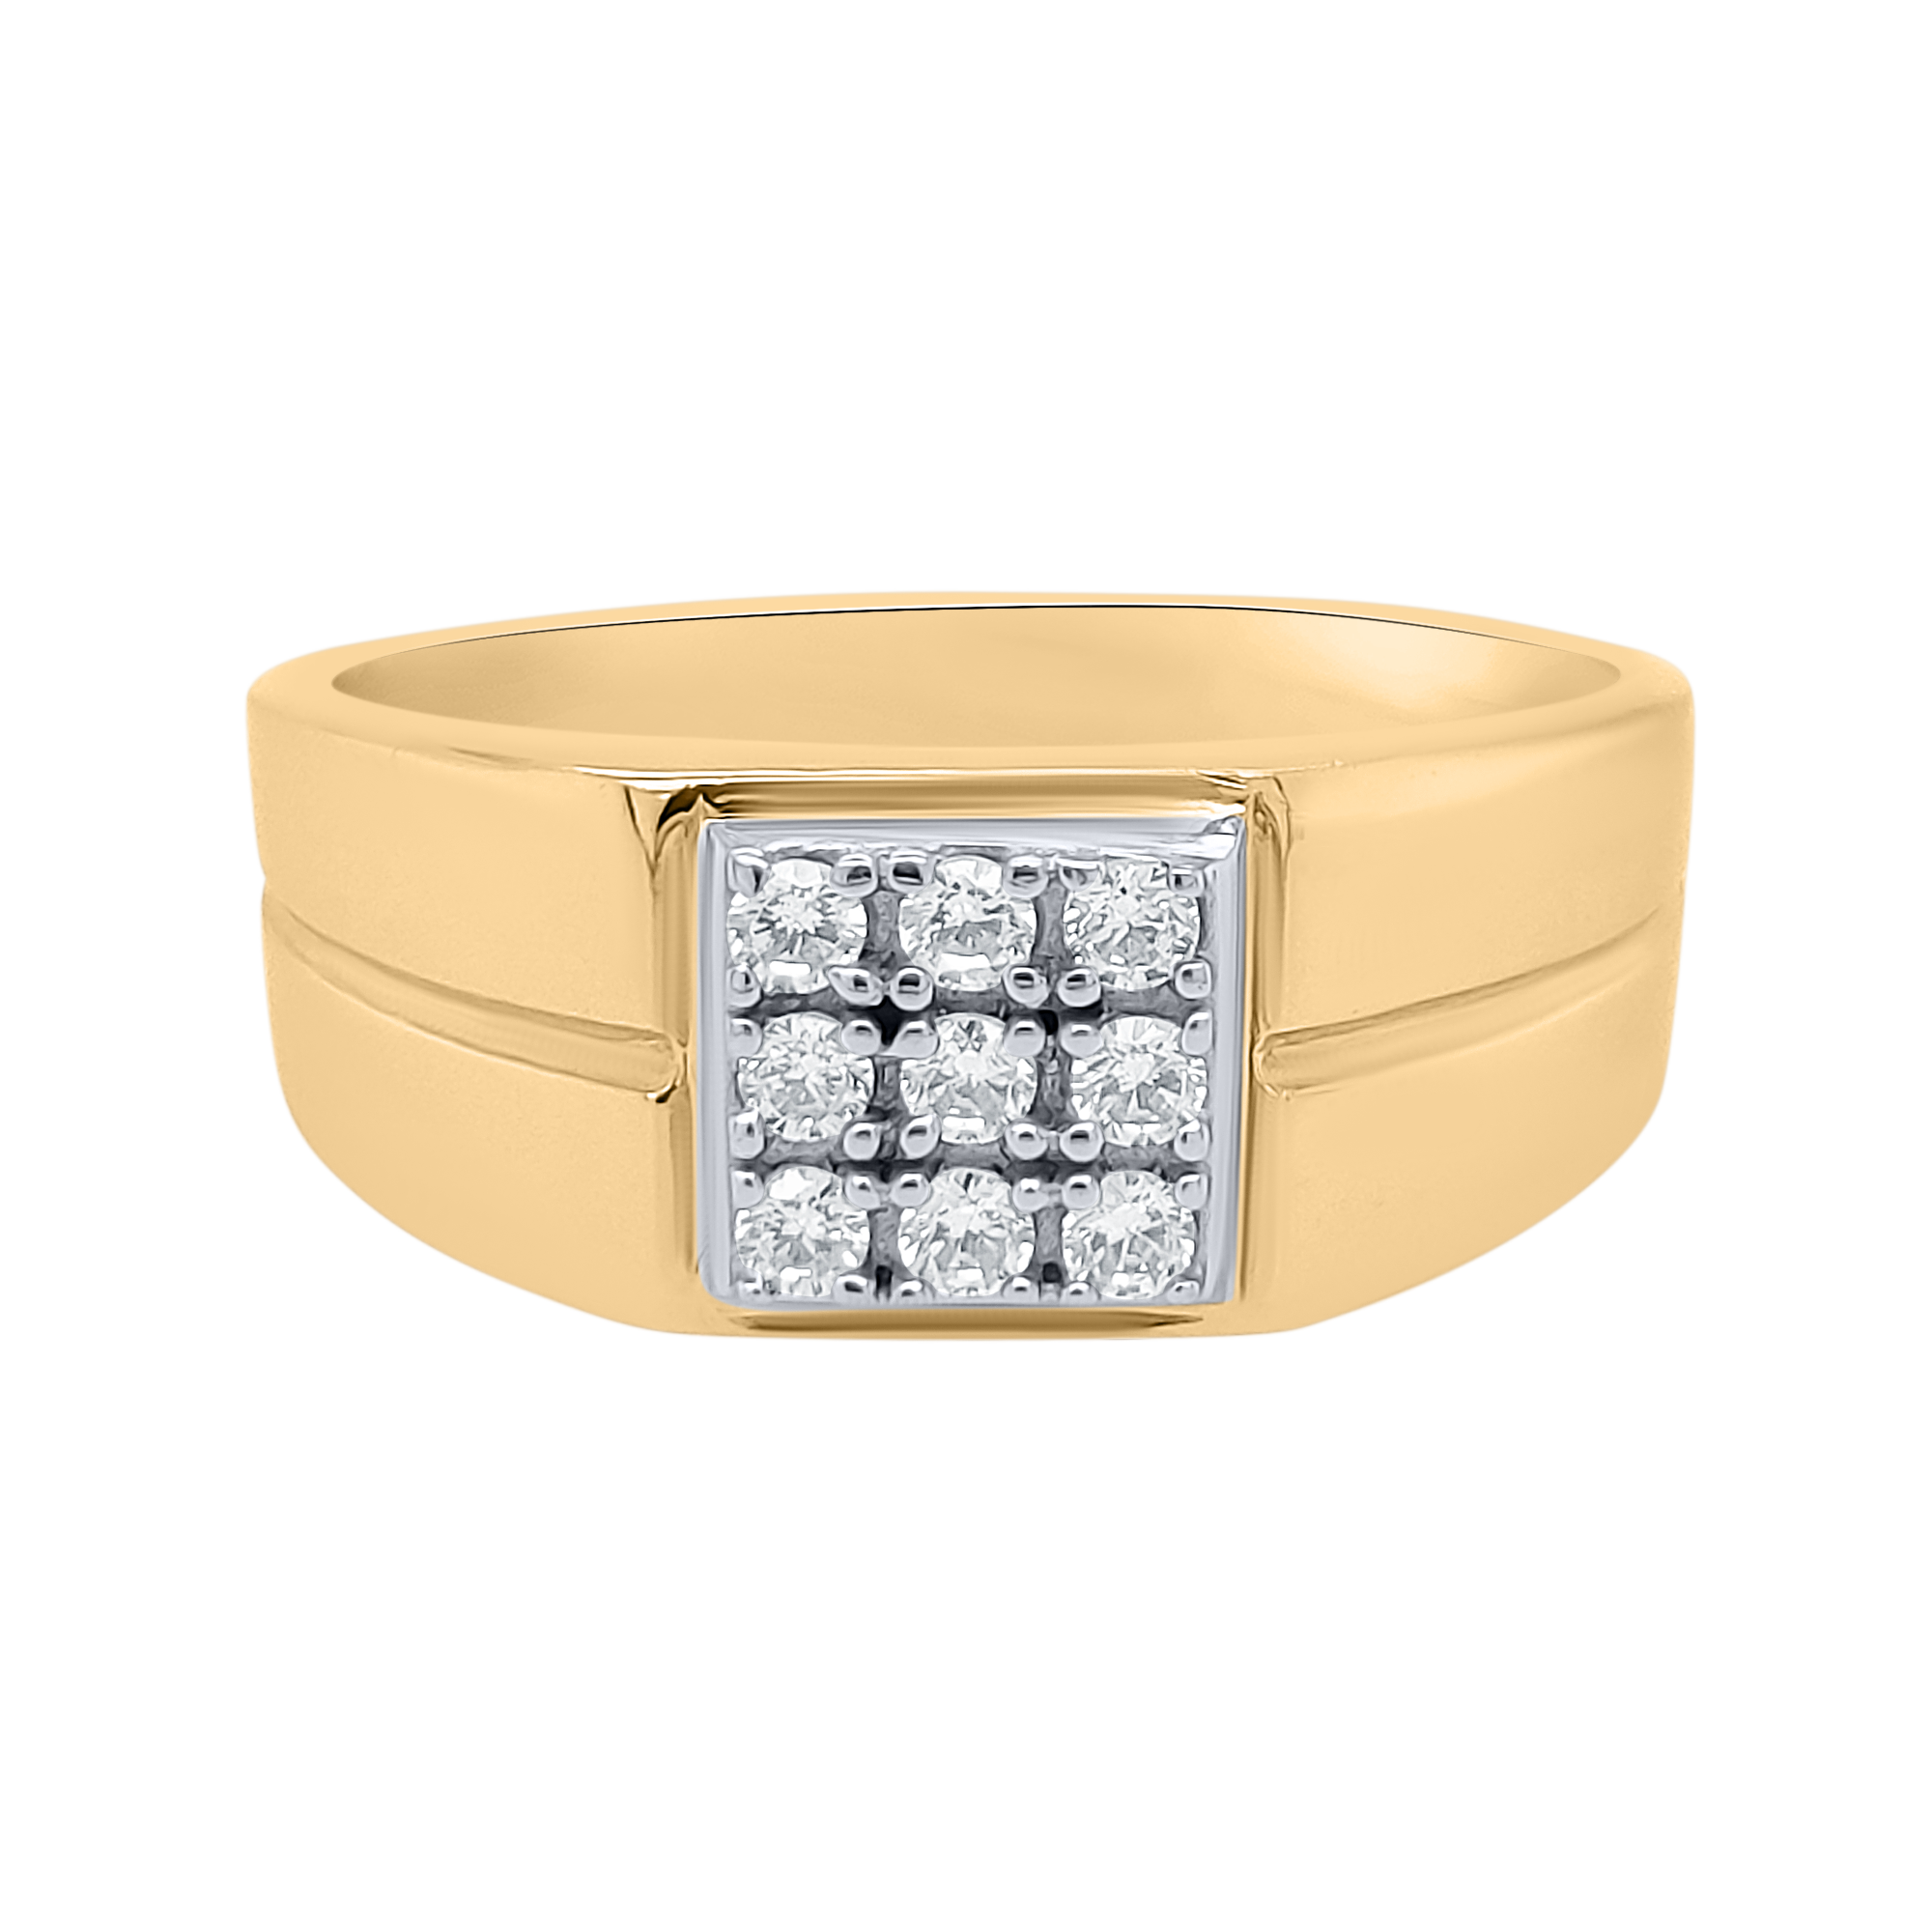 Yellow Gold Diamond Men's Ring With Watch Band Design